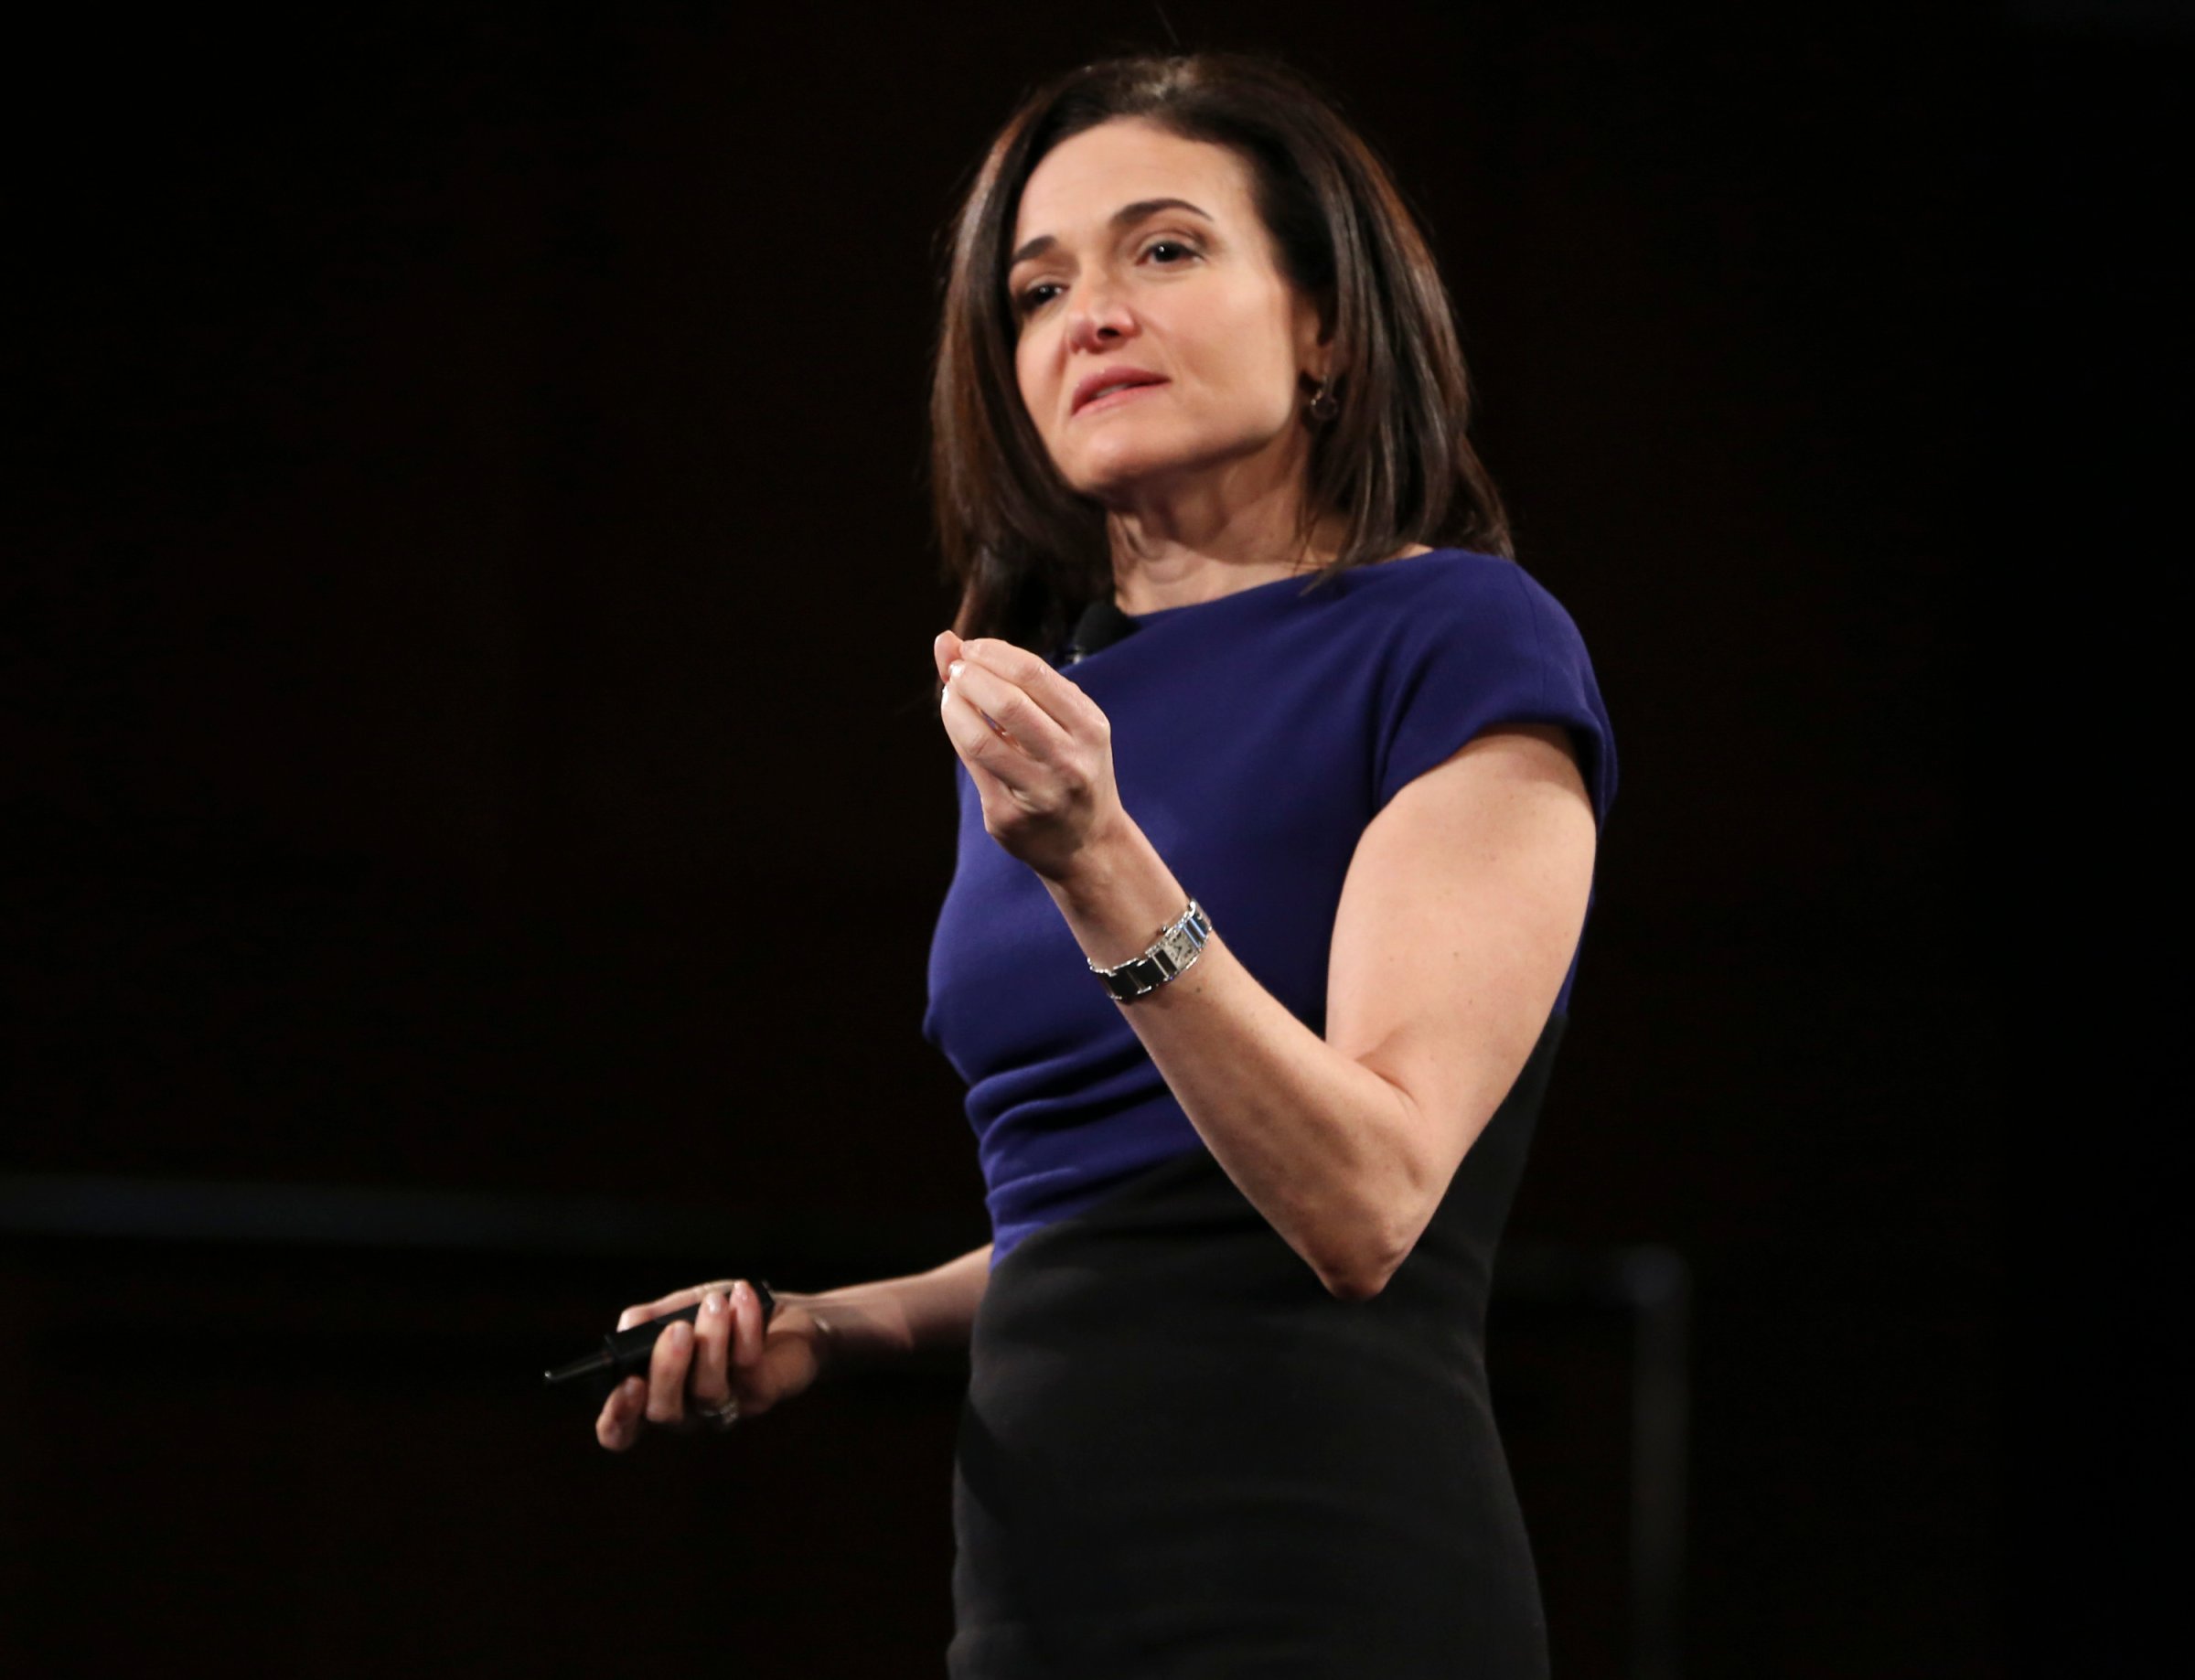 Facebook COO Sheryl Sandberg speaks on stage at the 2016 MAKERS Conference Day 2 at the Terrenea Resort in Rancho Palos Verdes, Calif. on Feb. 2, 2016.